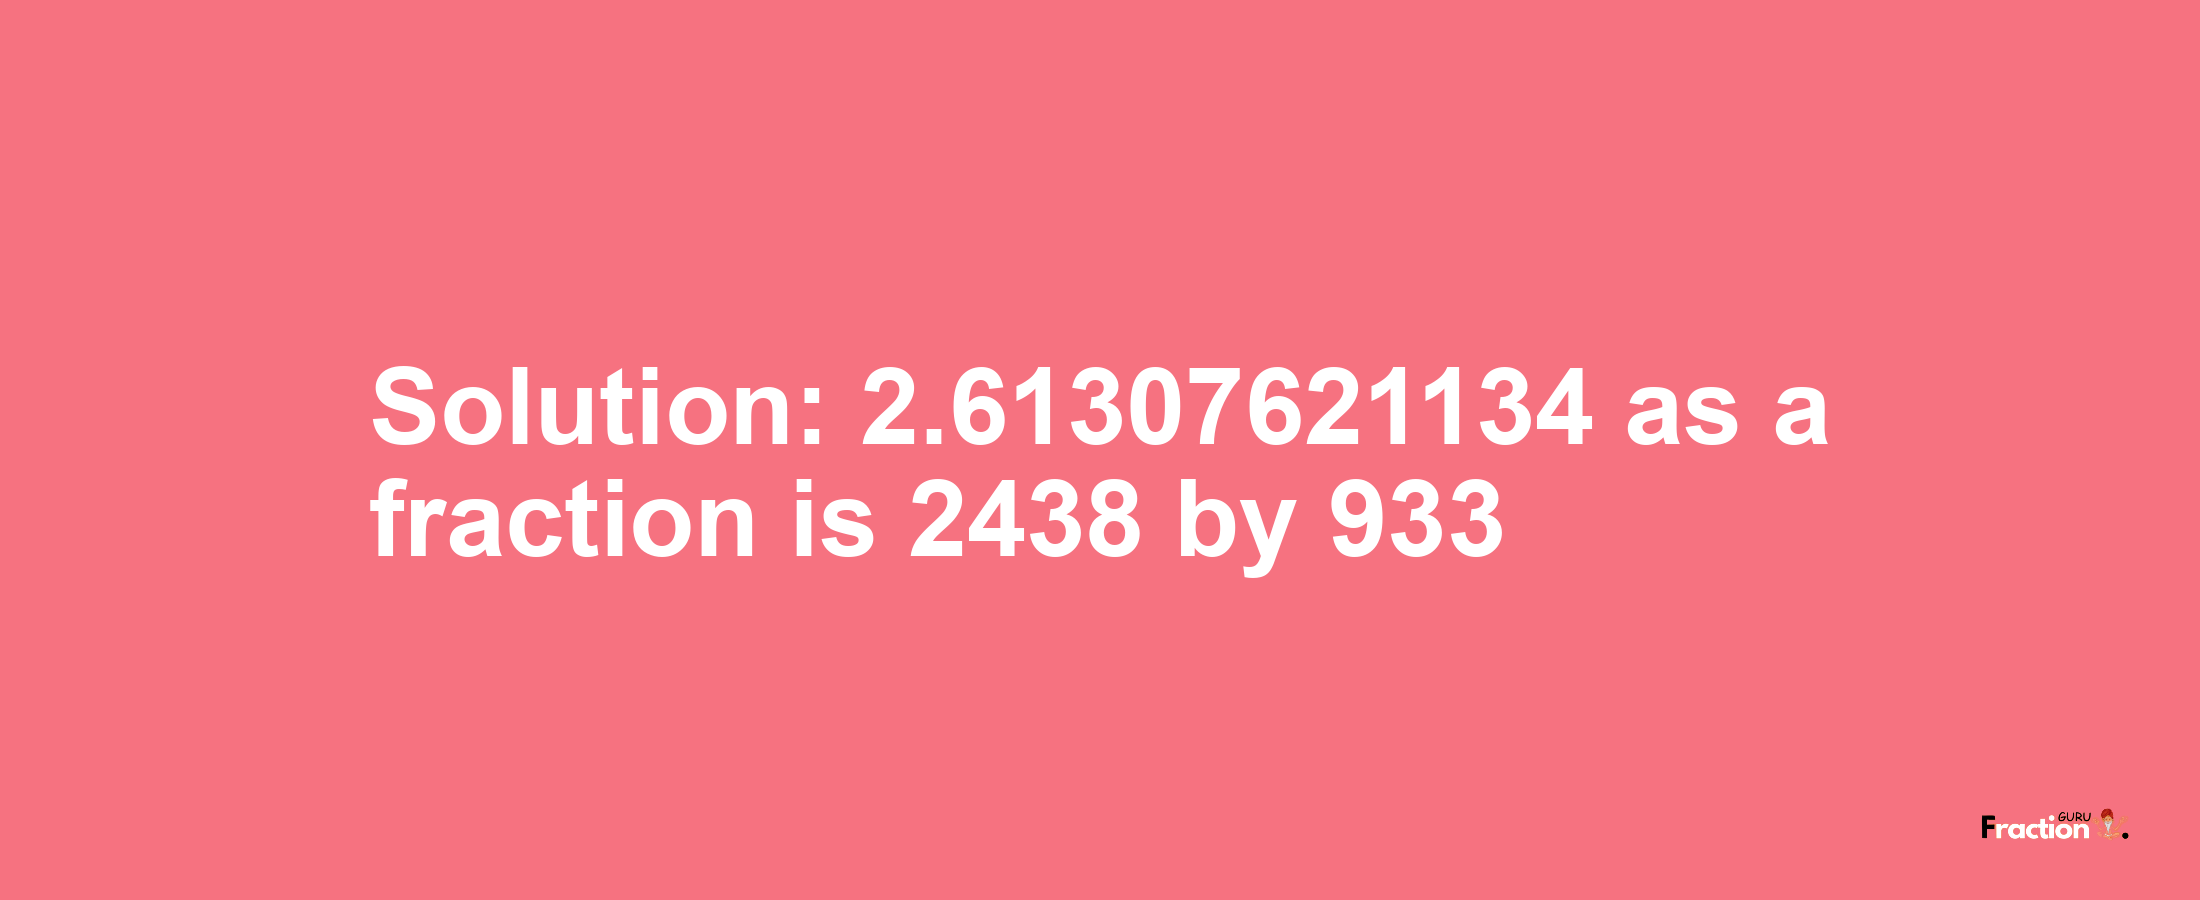 Solution:2.61307621134 as a fraction is 2438/933